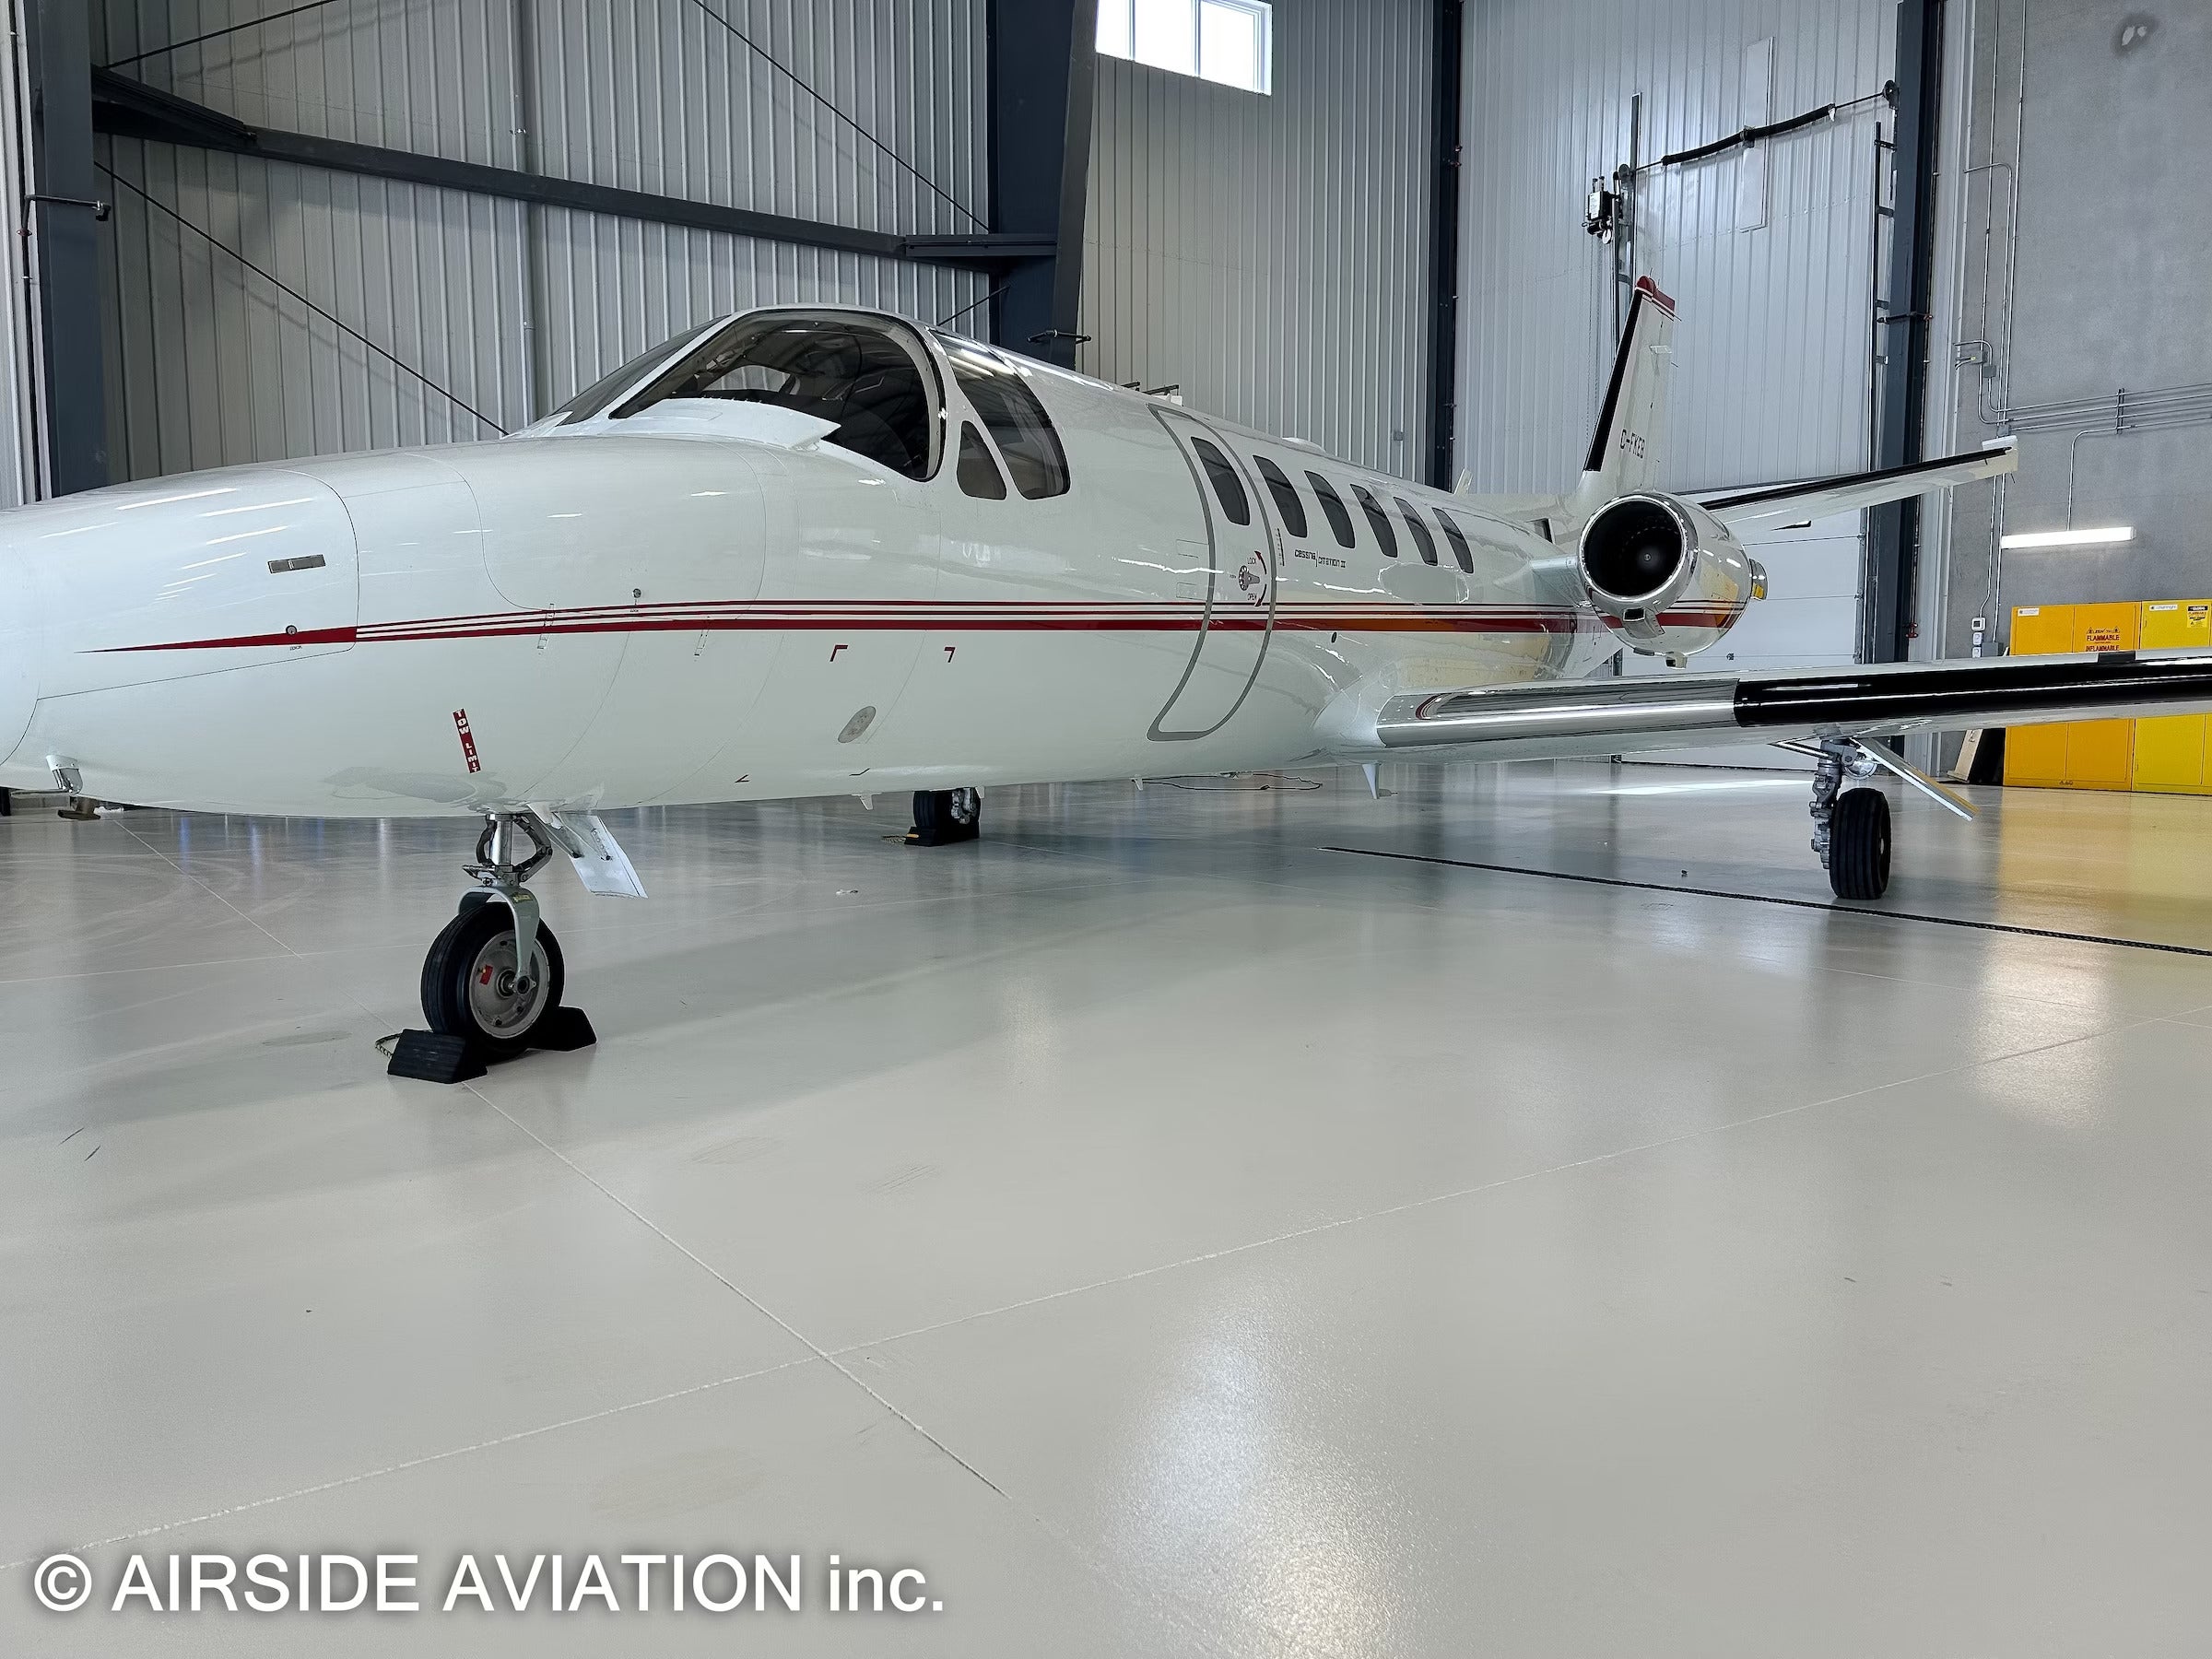 Today’s Top Aircraft For Sale Pick: 1991 Cessna 550 Citation II